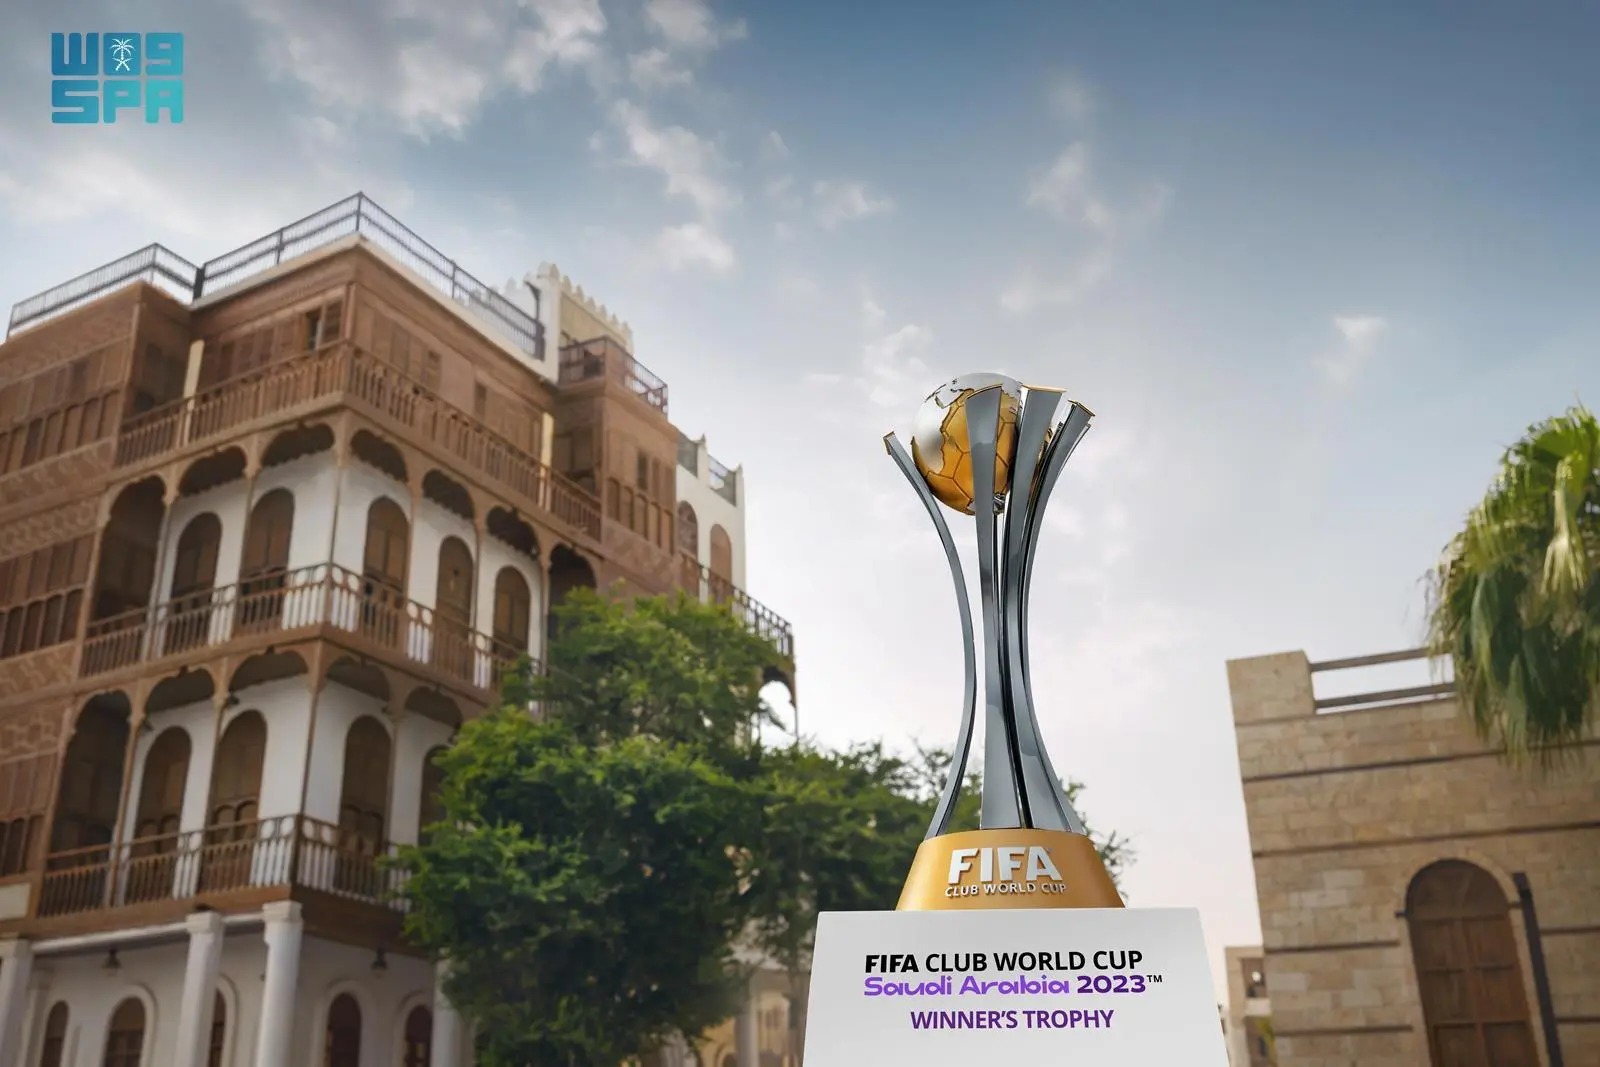 Jeddah Historic District Program is the official cultural destination of the FIFA Club World Cup Saudi Arabia 2023. (SPA)